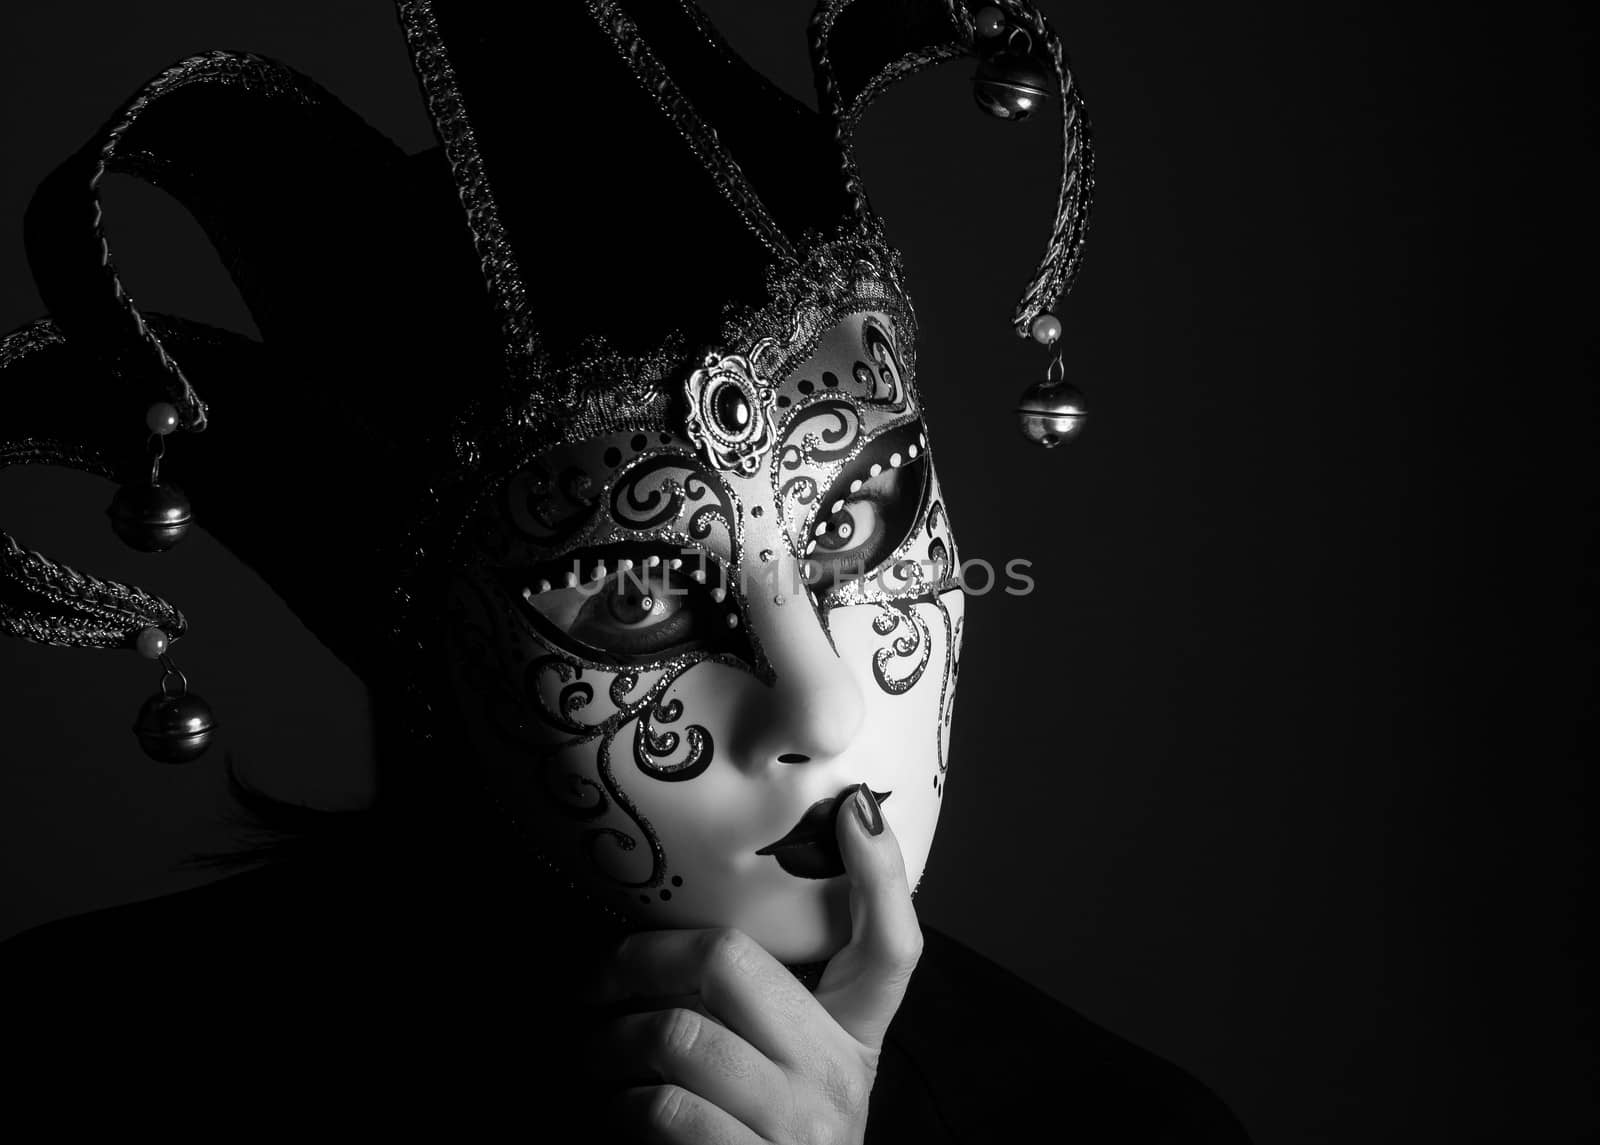 portrait with Venice mask by sognolucido